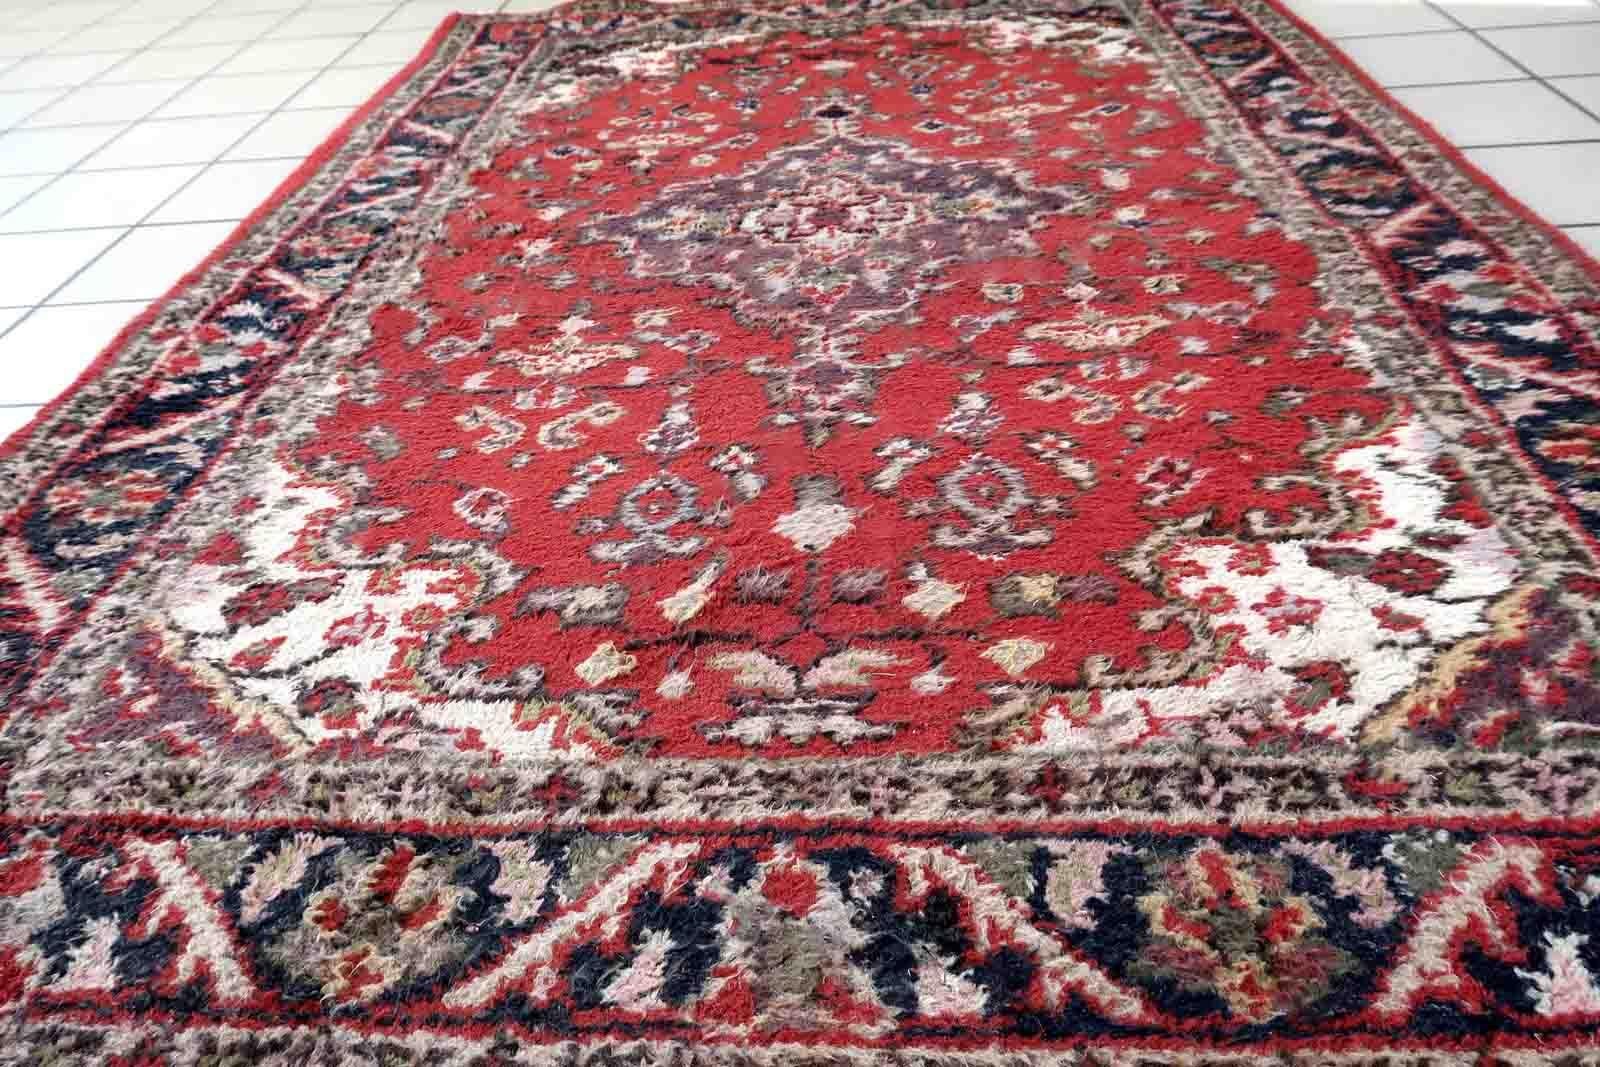 Handmade vintage Hamadan rug in red and blue colors. The rug is from the end of 20th century in original good condition.

-condition: original good,

-circa: 1970s,

-size: 4.1' x 6' (125cm x 183cm),

-material: wool,

-country of origin: